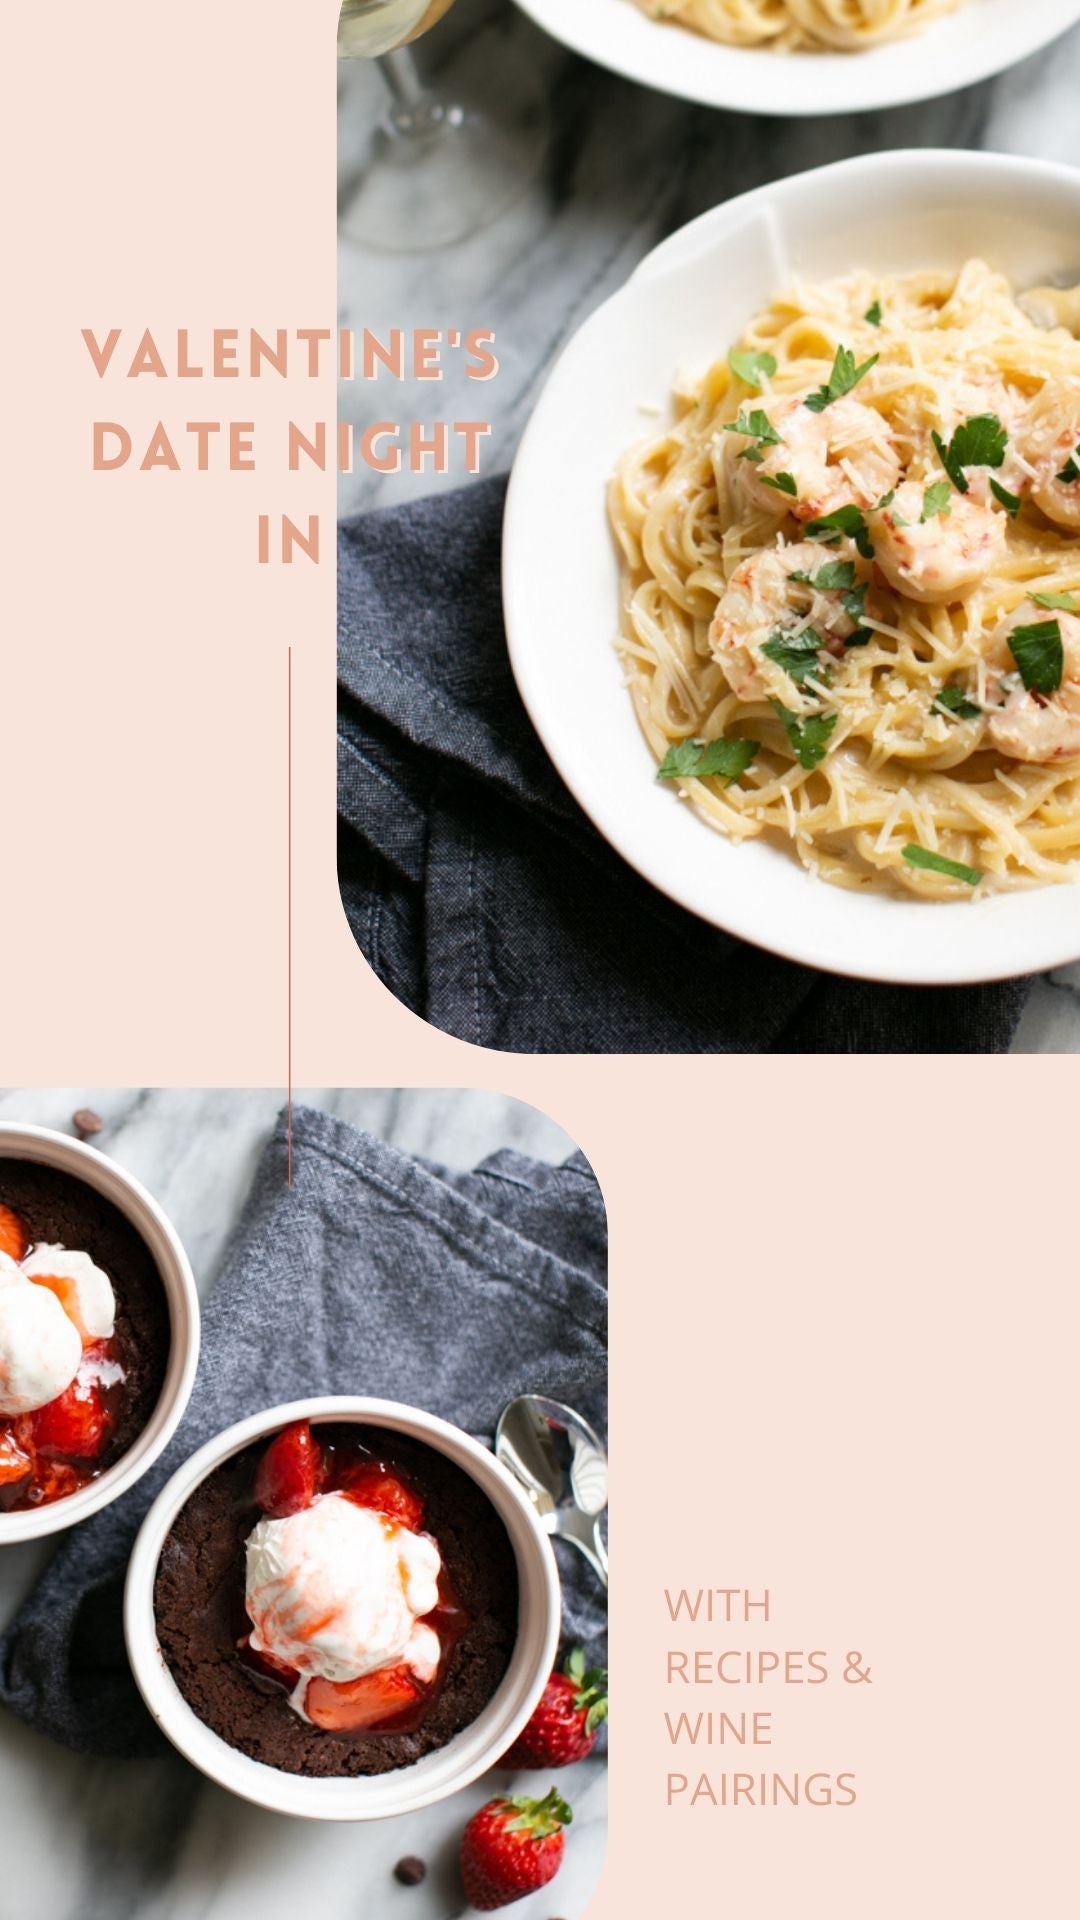 Valentine's Date Night In with Recipes & Wine Pairings